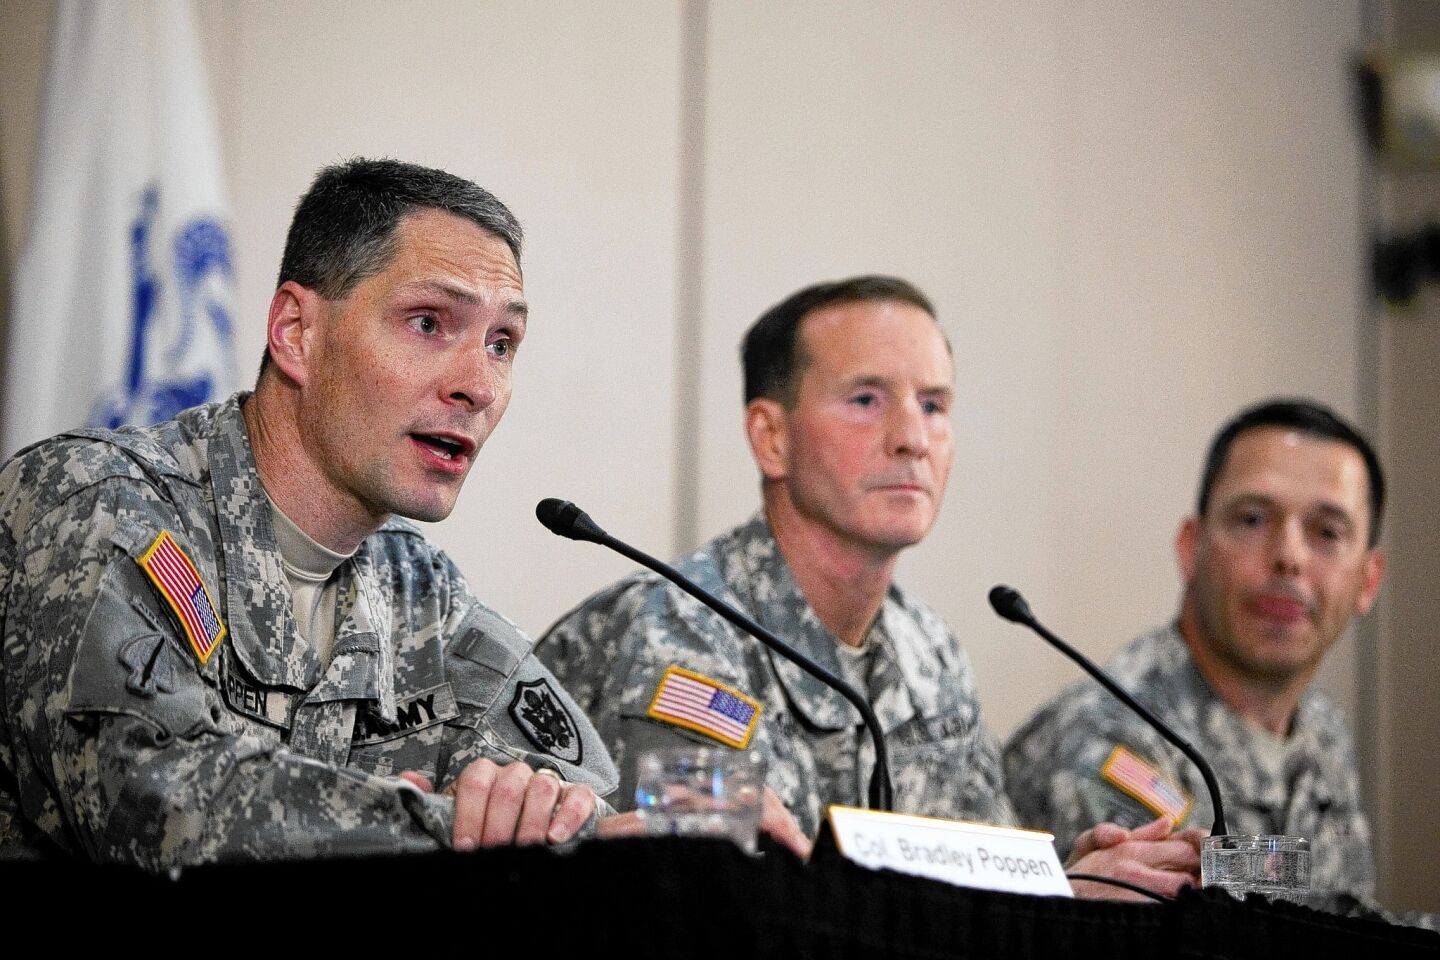 Col. Bradley Poppen, left, Maj. Gen. Joseph P. DiSalvo and Col. Ronald Wool discuss the condition of Sgt Bowe Bergdahl at a news conference at Ft. Sam Houston in San Antonio.